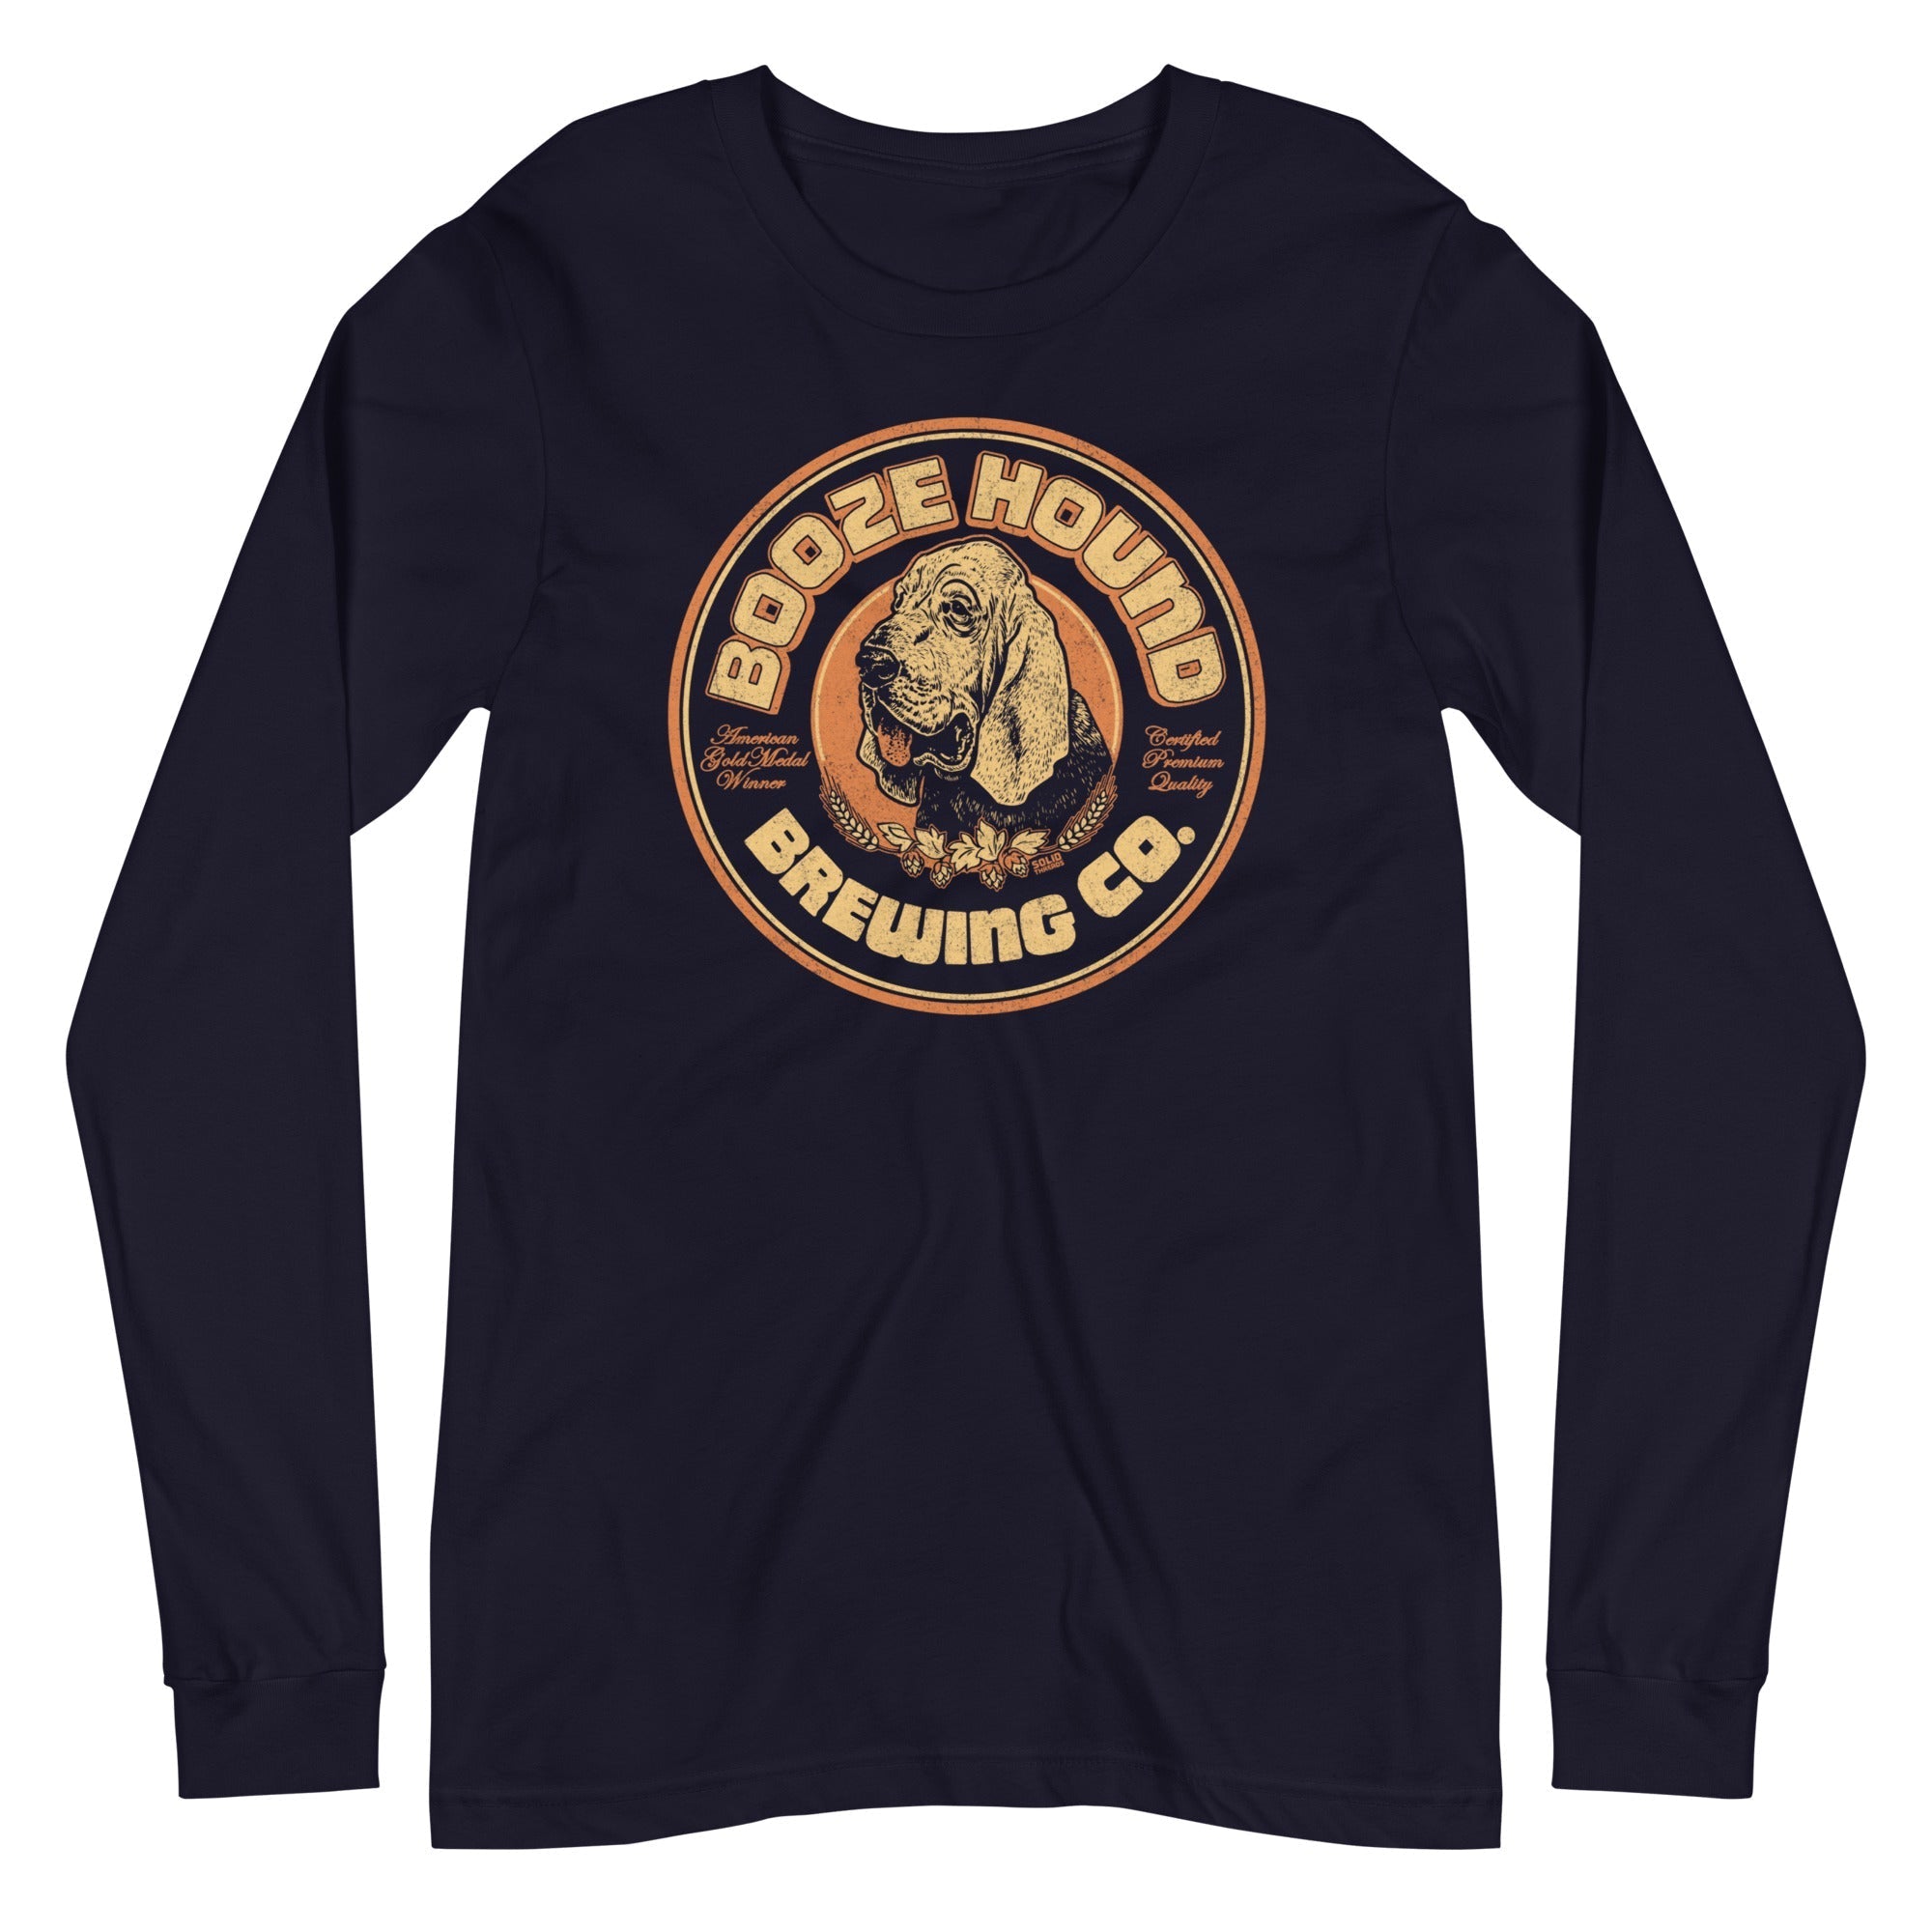 UnisexBoozehound Brewing Co. Vintage Graphic Long Sleeve Tee | Retro Drinking T-Shirt - Solid Threads